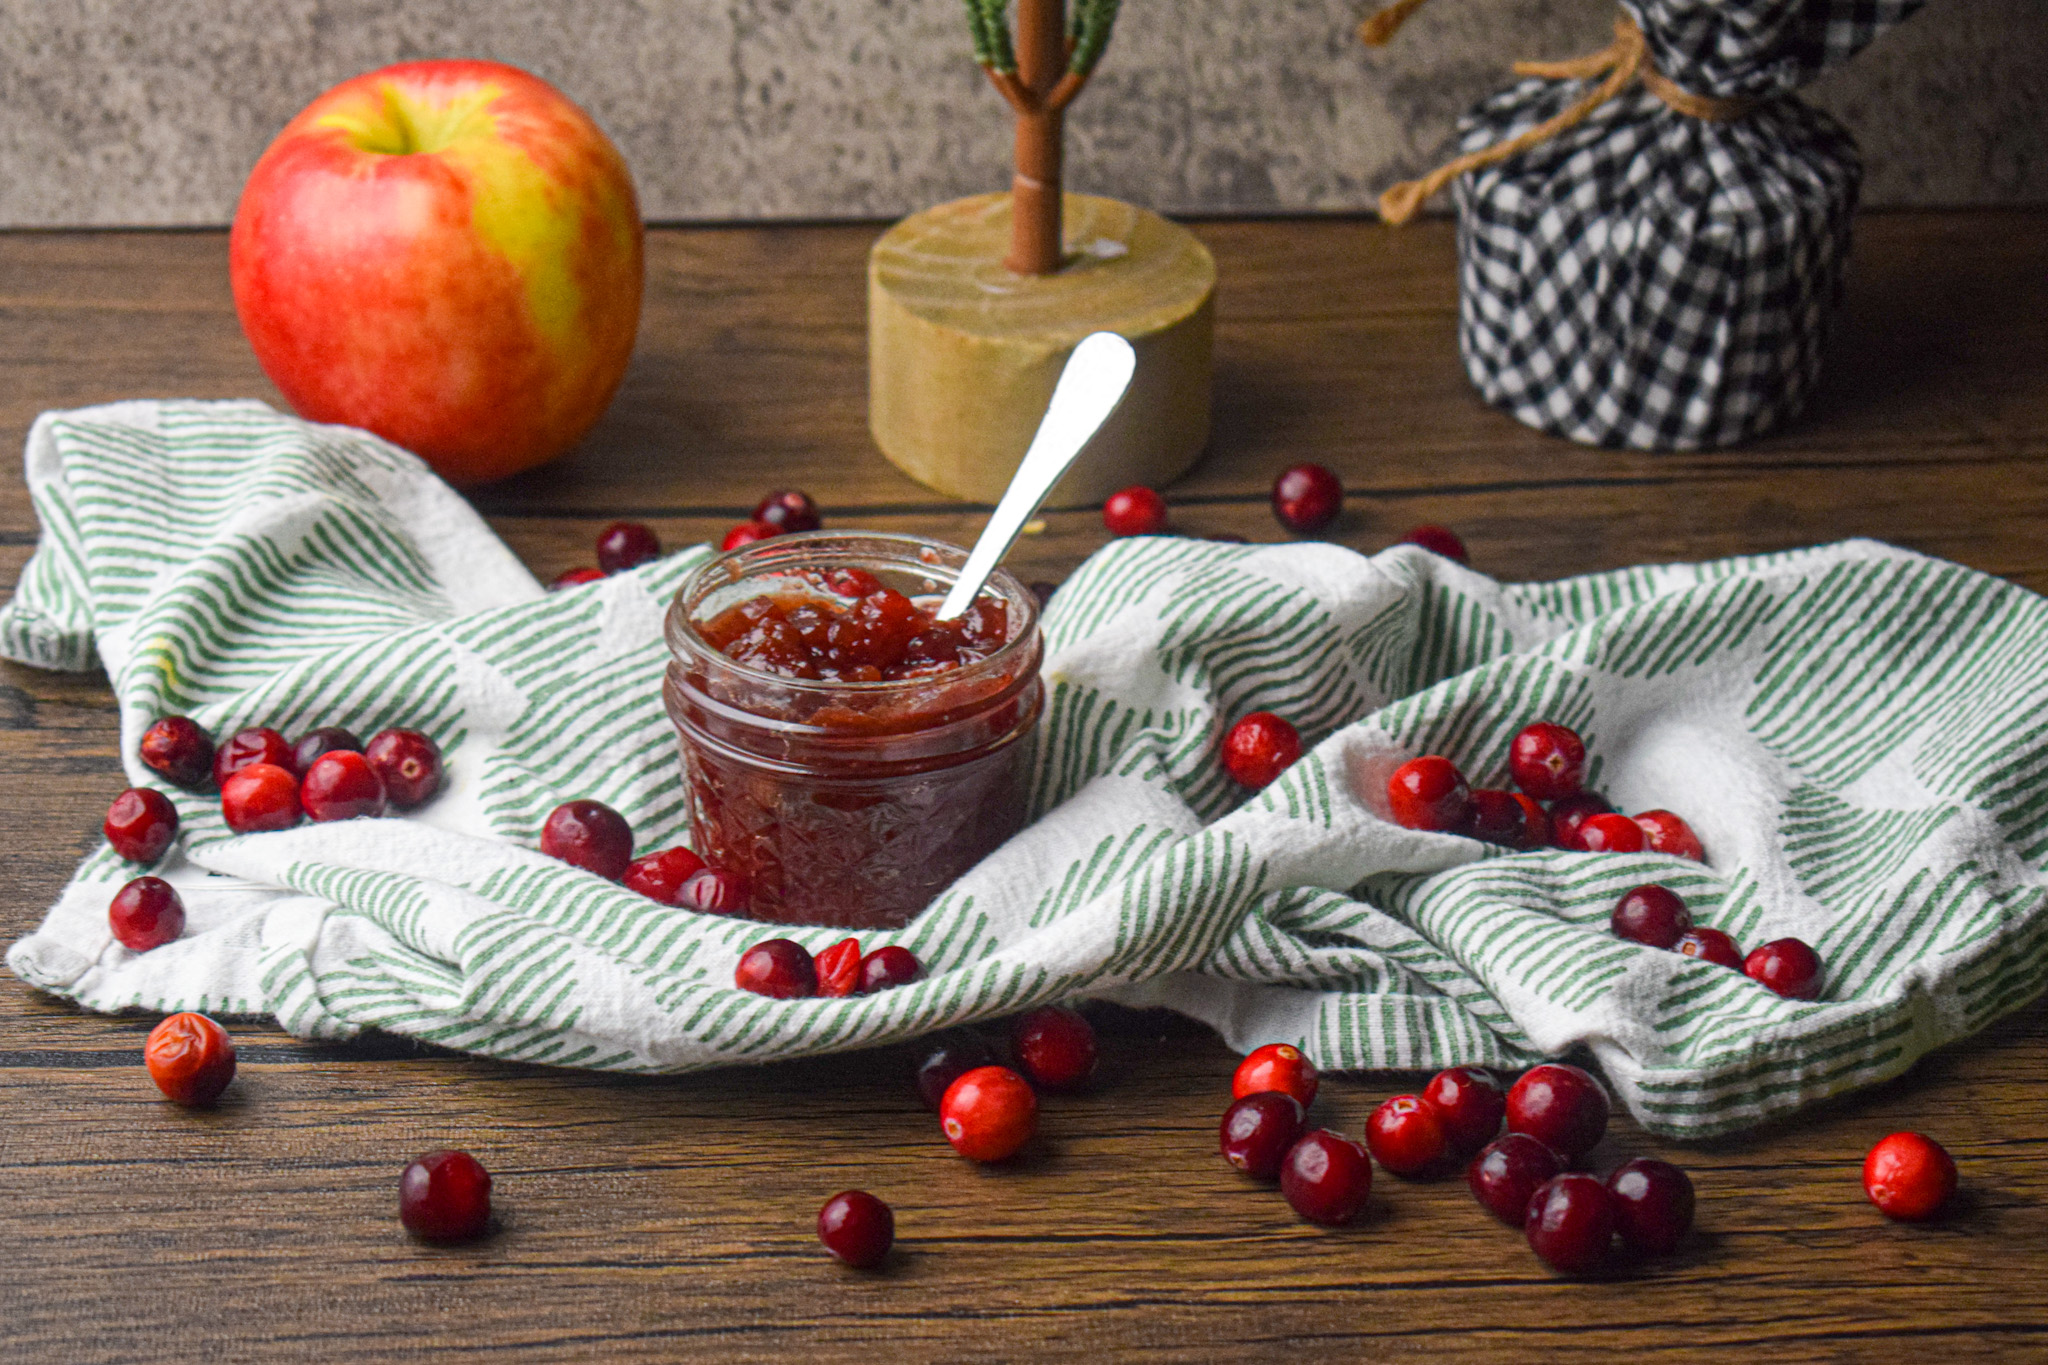 holiday jam recipe with cranberries, pears and apples